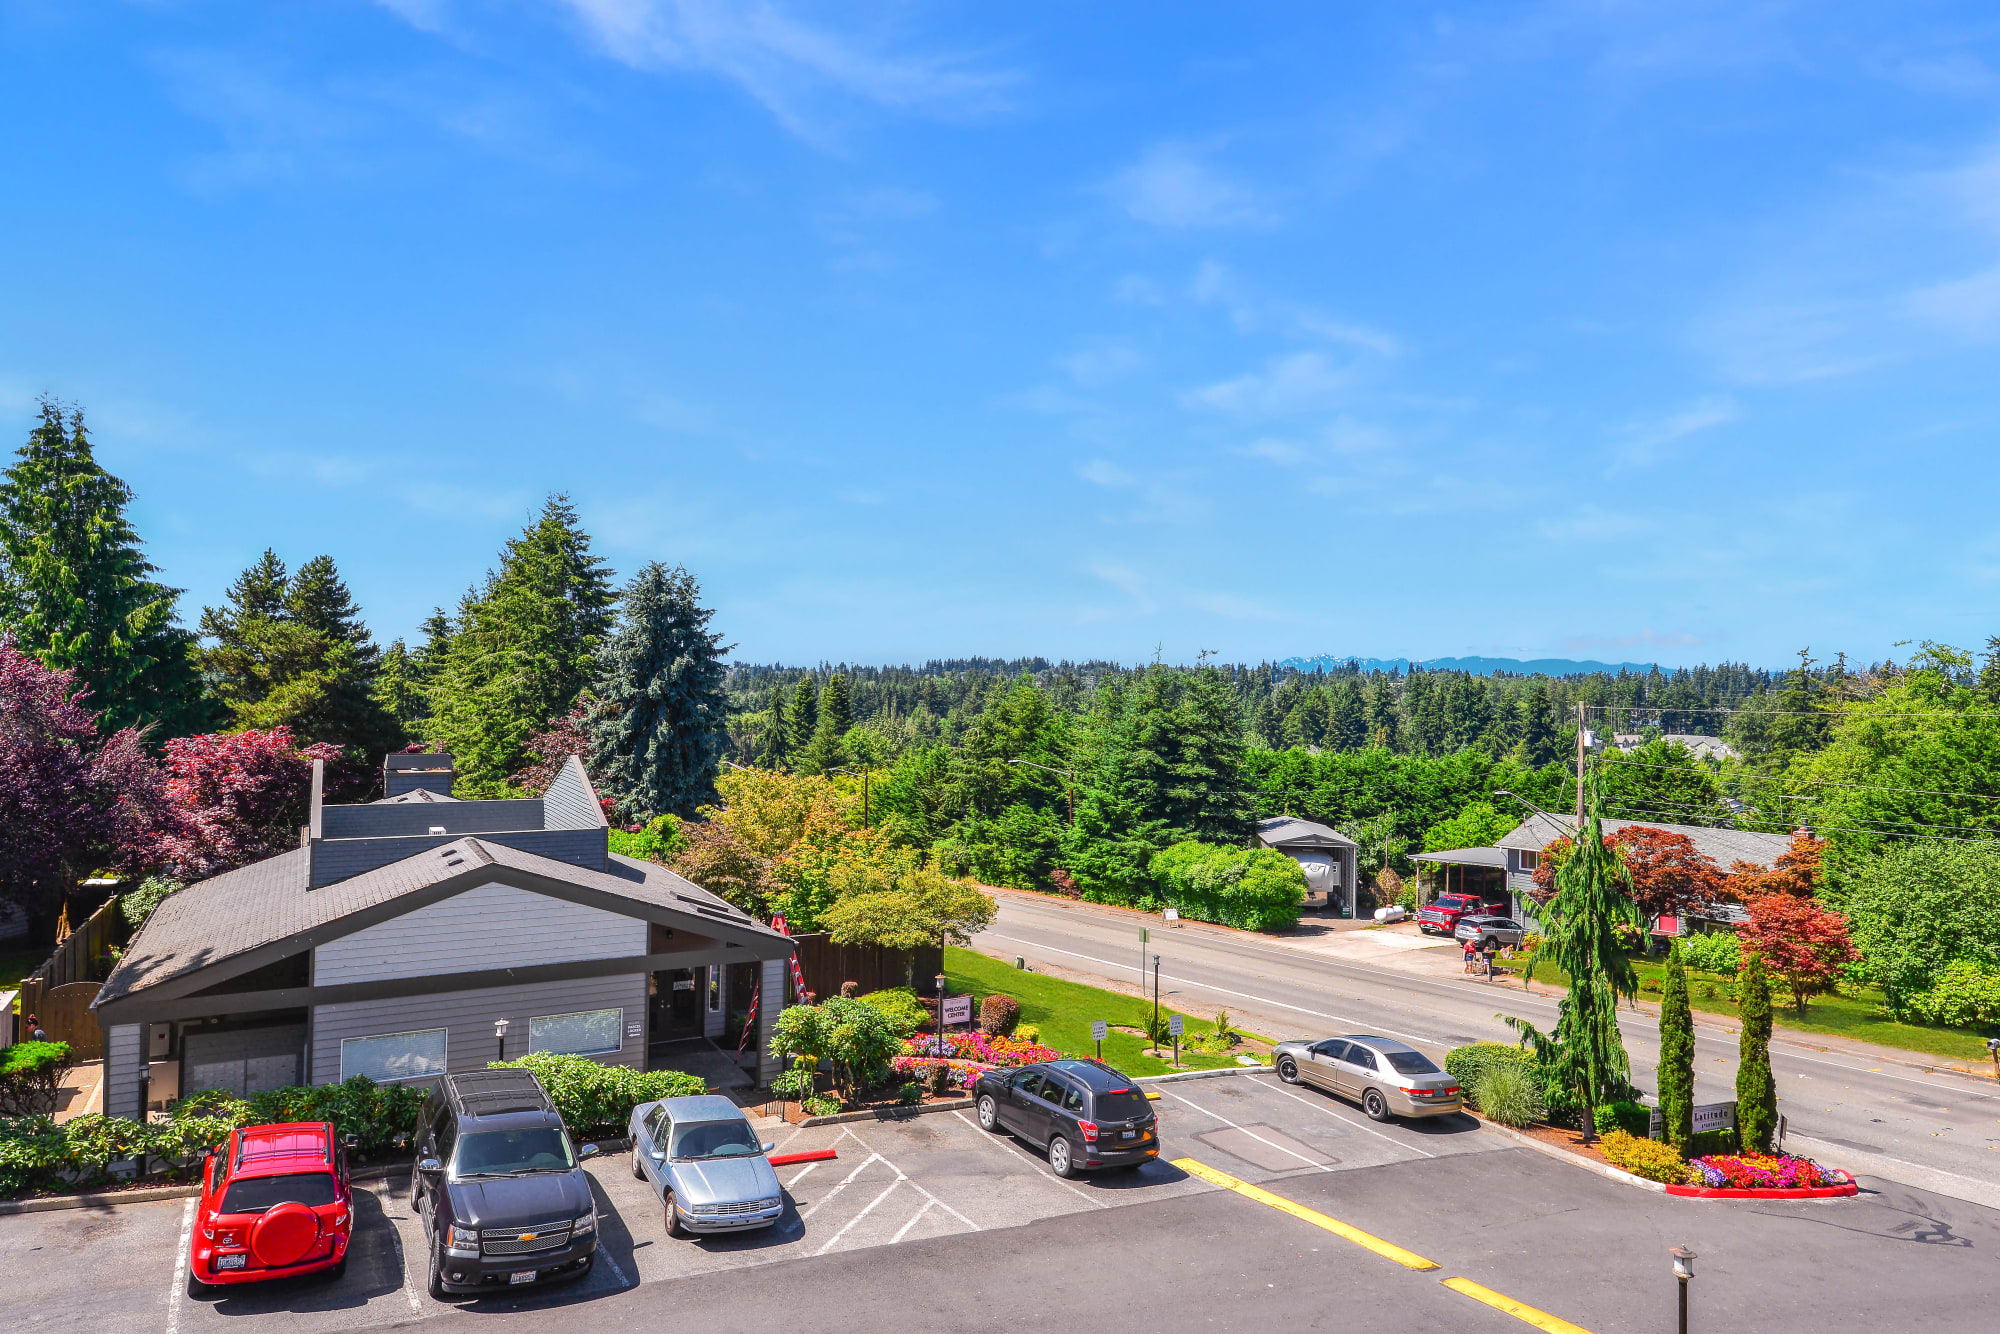 Aerial view of property and surrounding area at Latitude Apartments in Everett, Washington